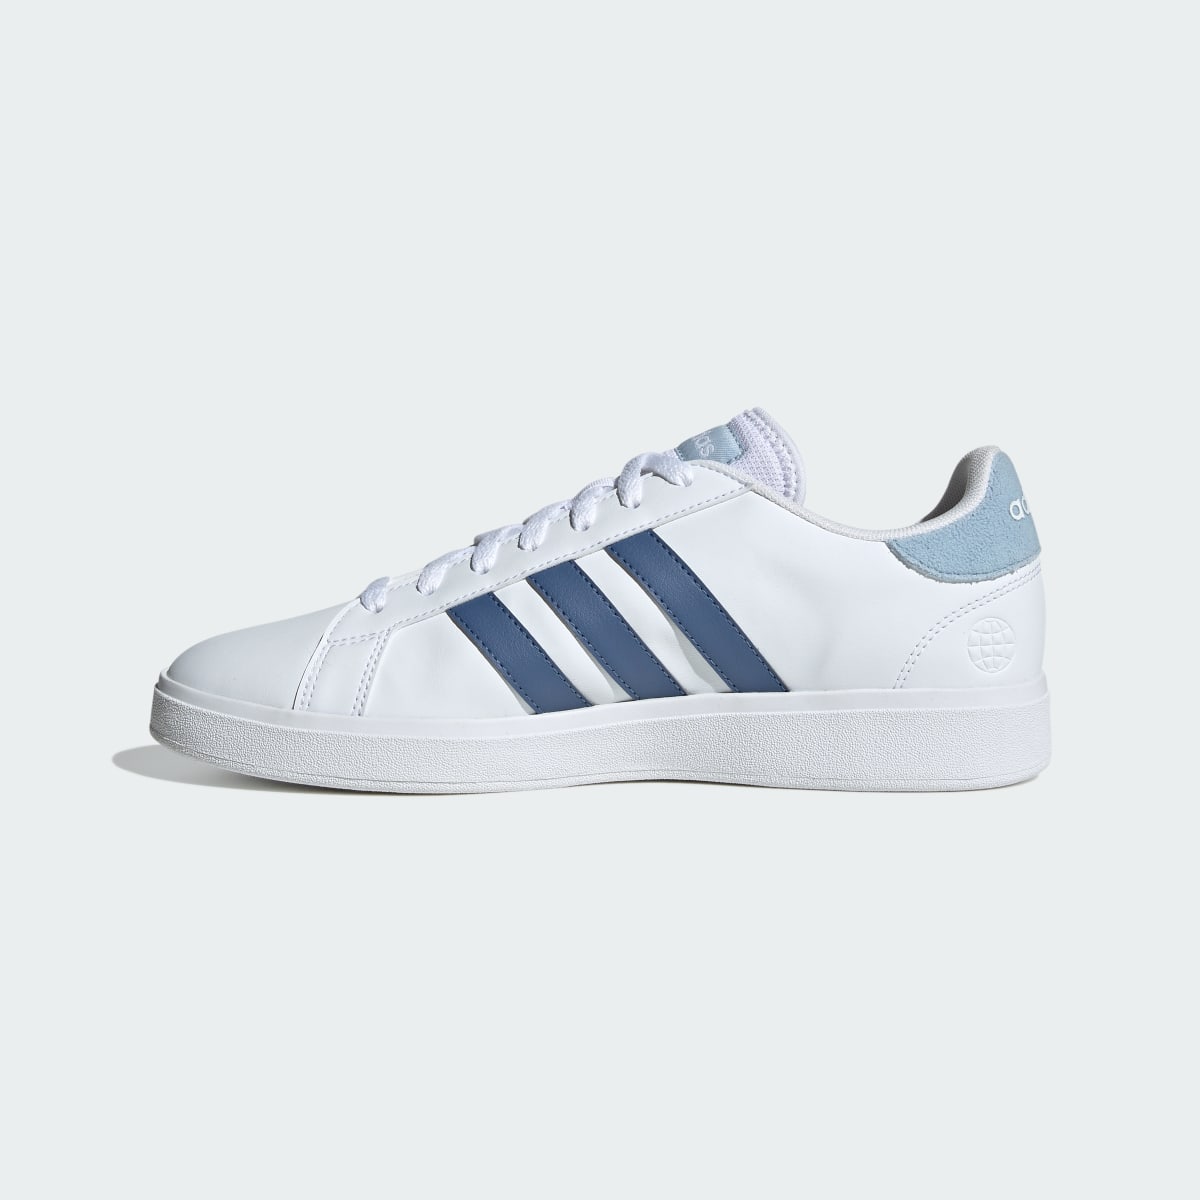 Adidas Grand Court TD Lifestyle Court Casual Shoes. 9